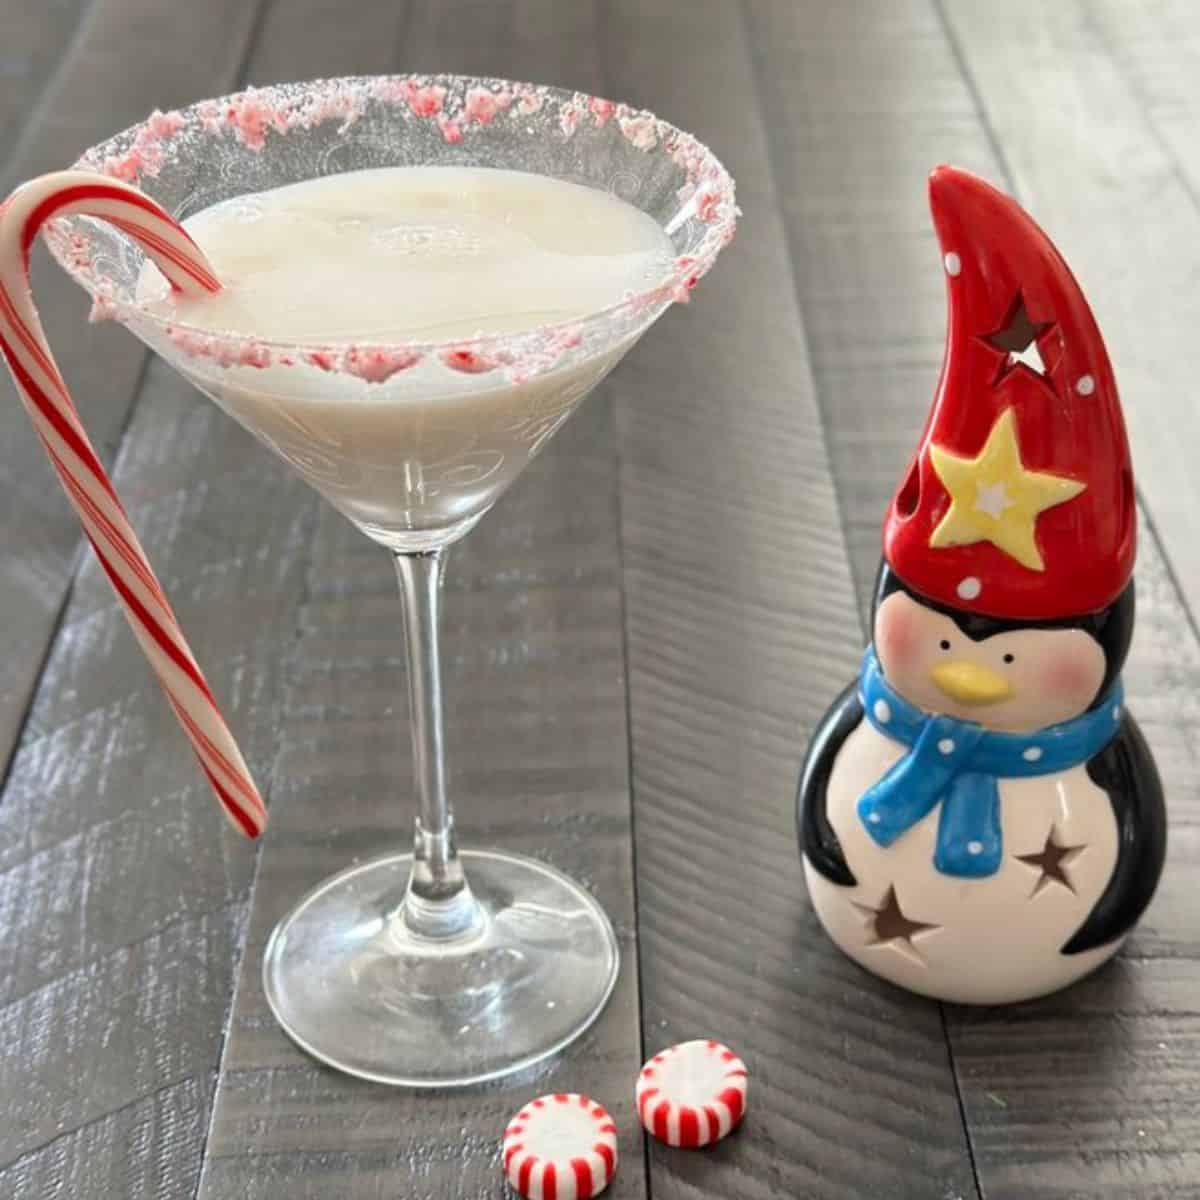 Candy cane martini in a glass with a candy cane as garnish and a figurine of a penguin next to it.